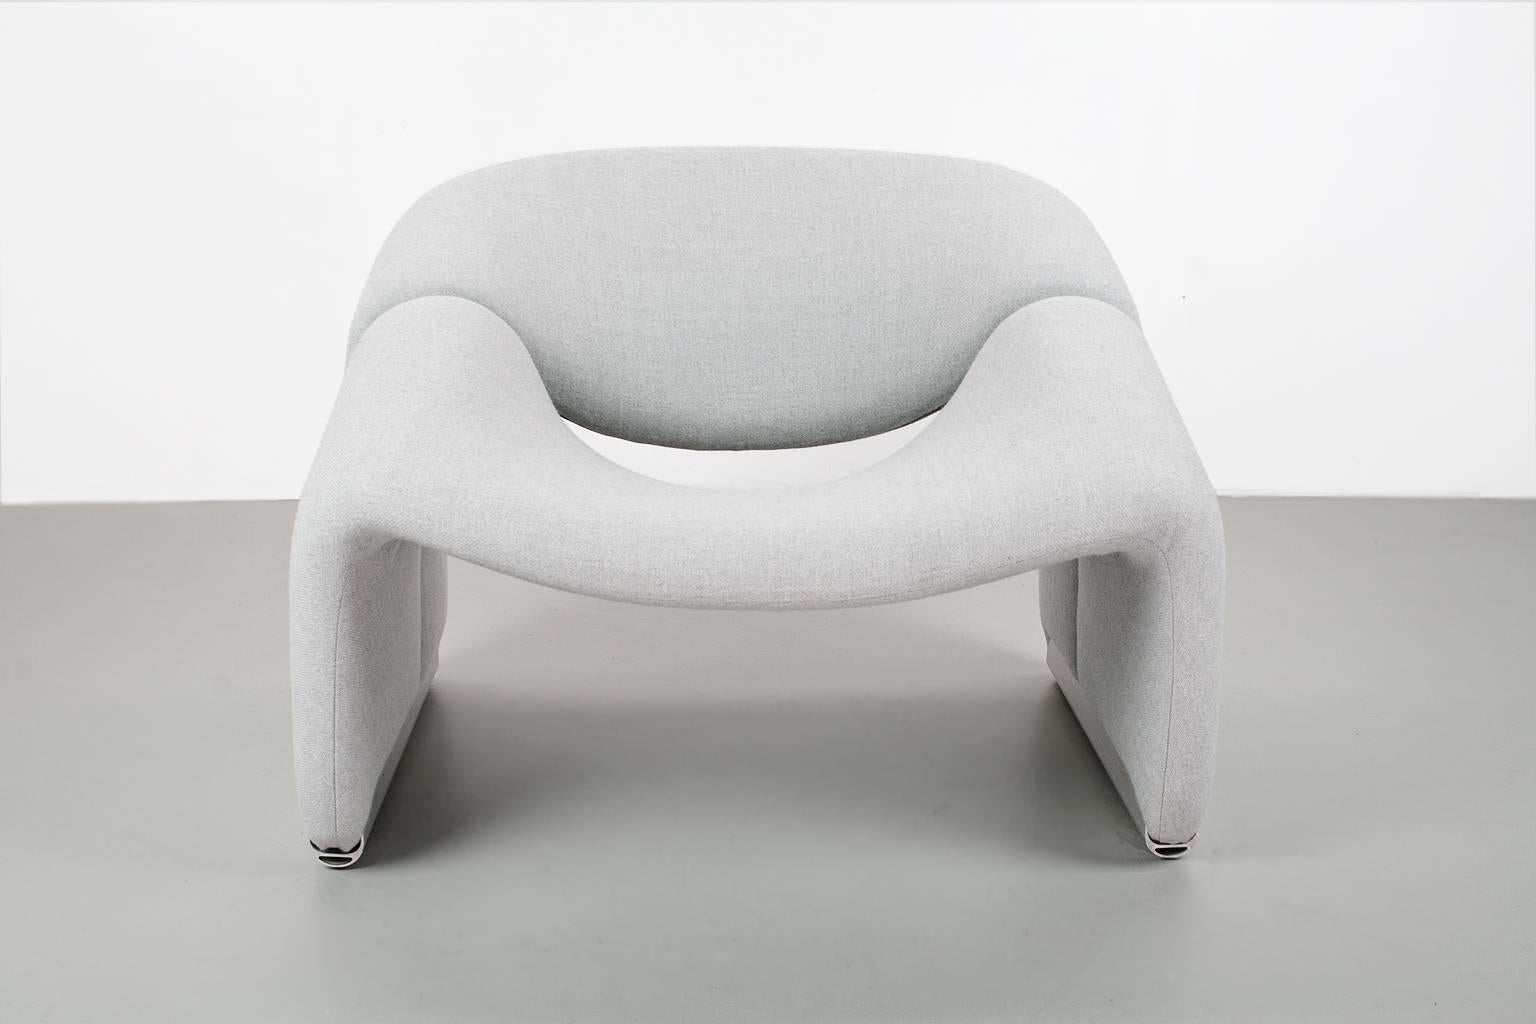 In 1972 Pierre Paulin designed the F598, the ‘groovy’ shell seat also known as the M chair, which quickly became the darling of the trendy avant-garde. A special feature is the coated aluminium profile.

This F598 is re-upholstered in a grey